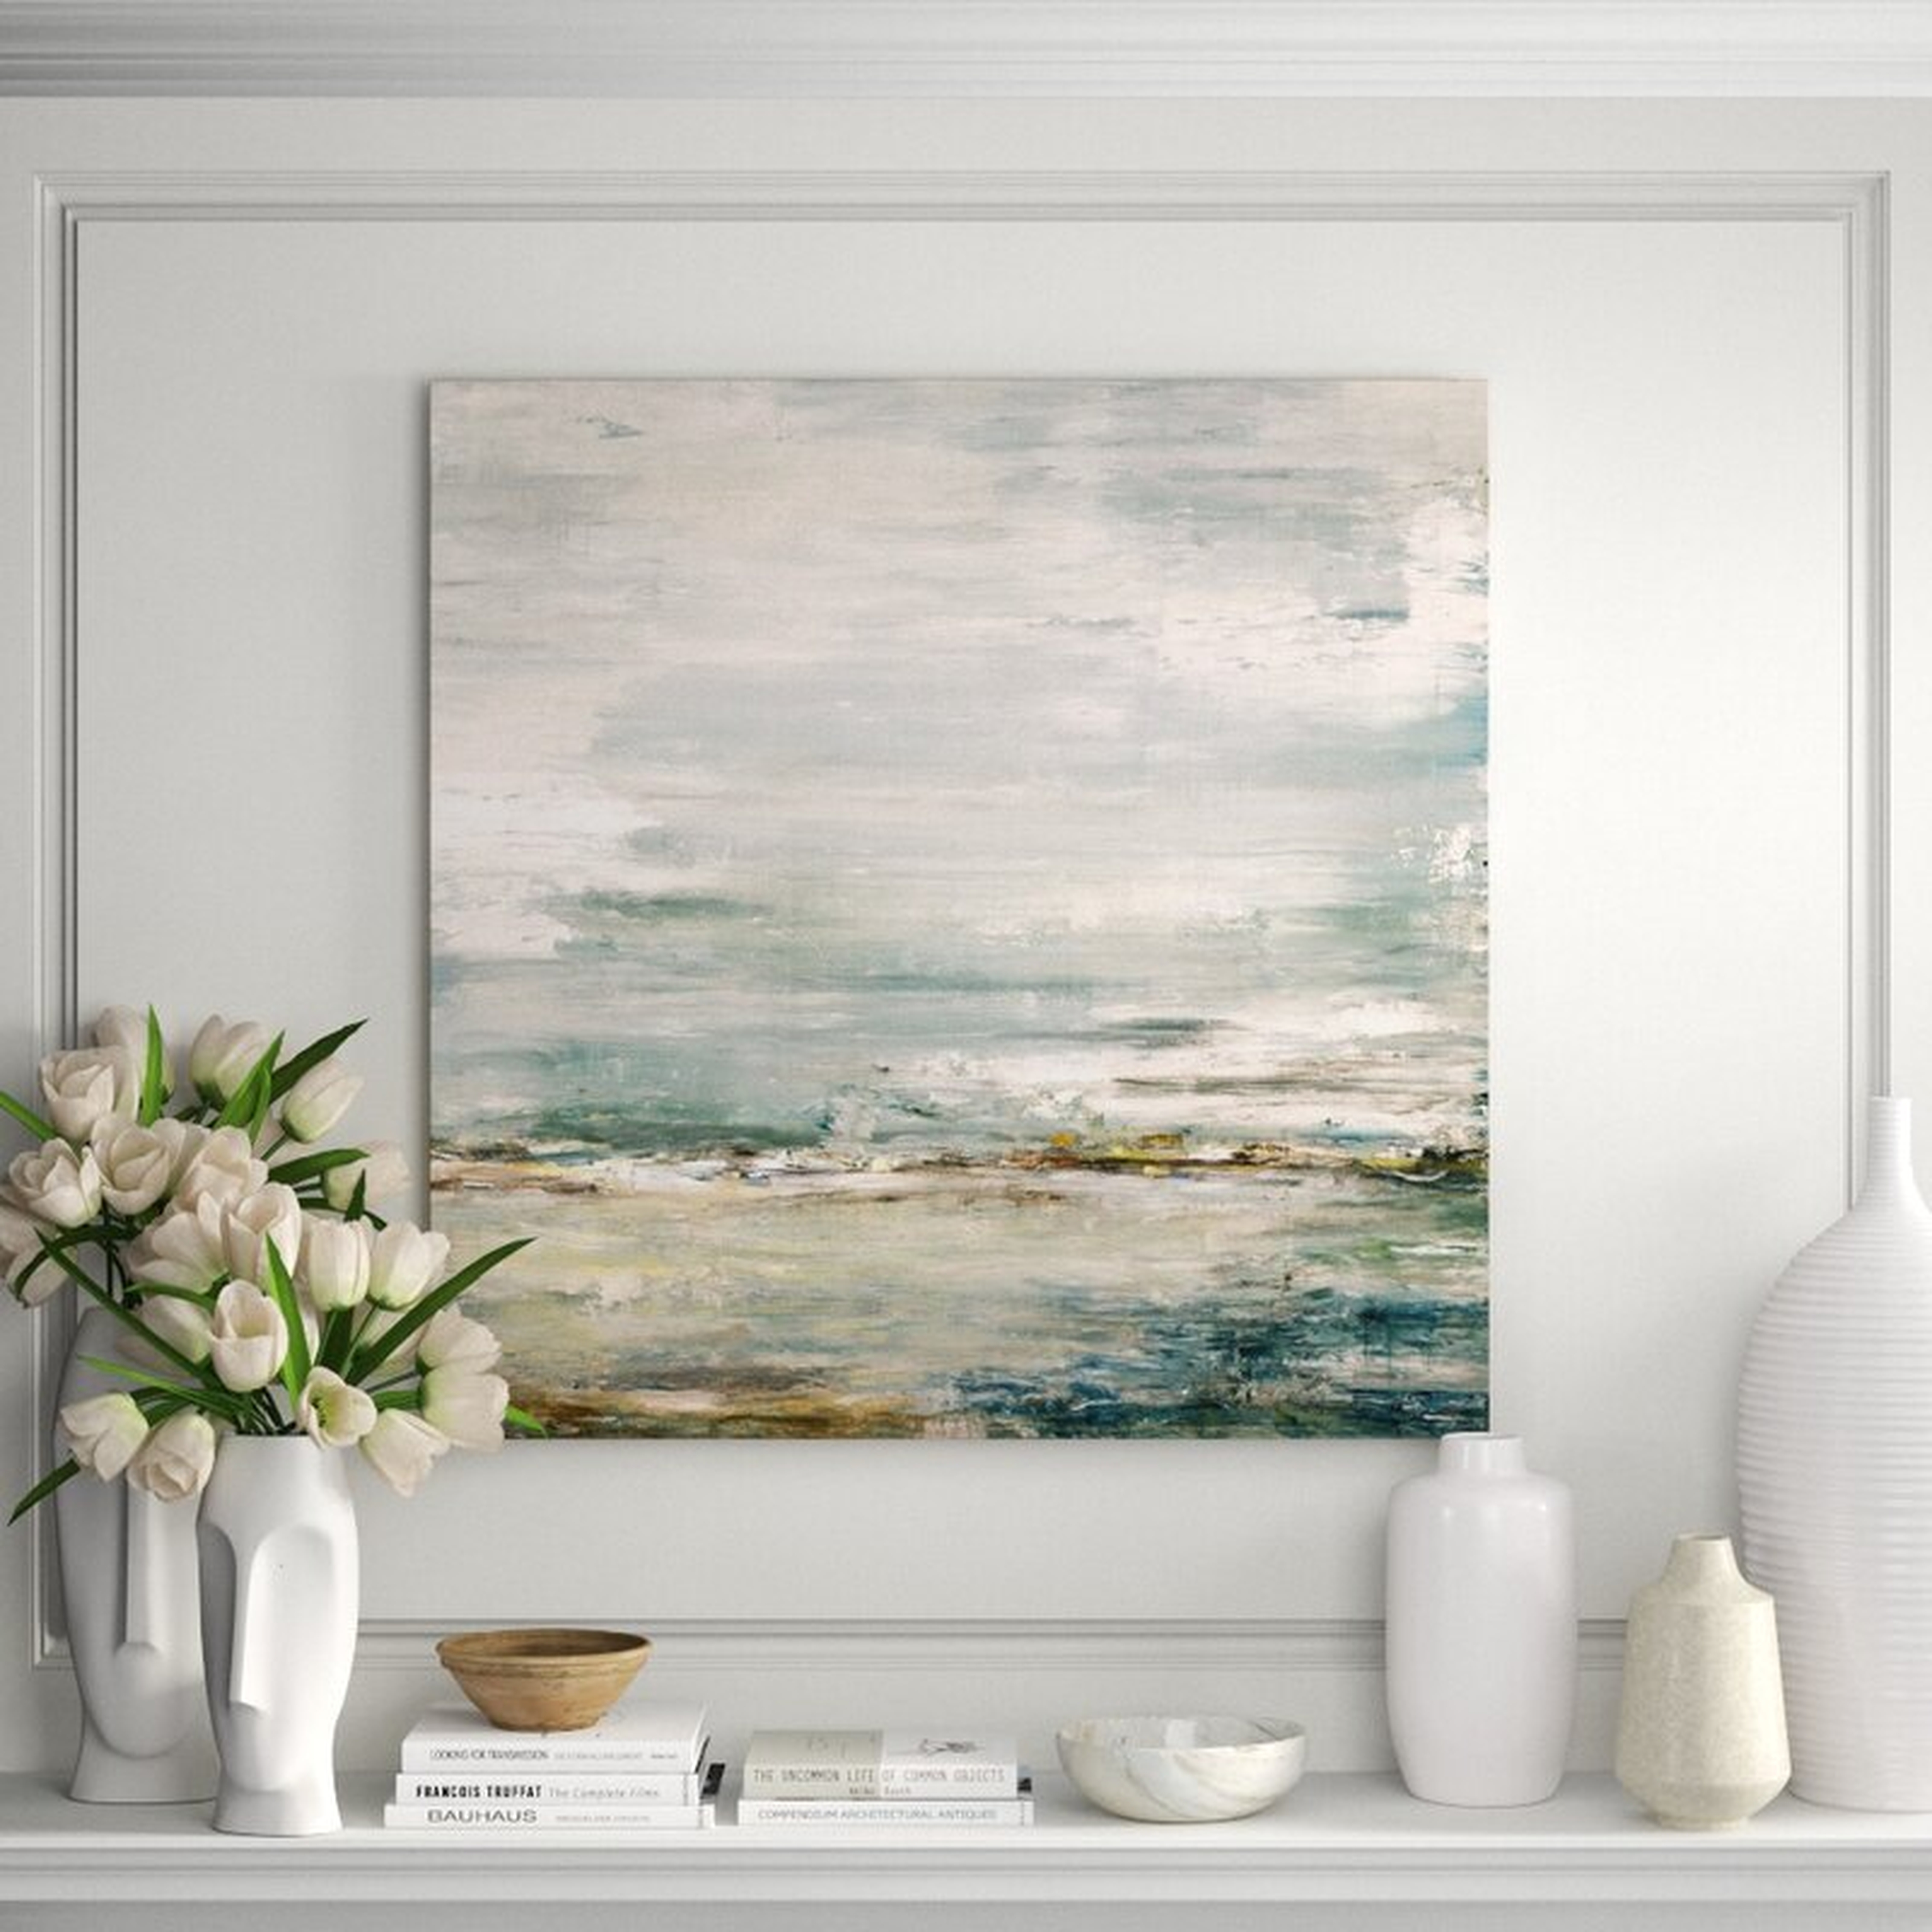 John Beard Collection 'Sea and Sky' Painting on Canvas Size: 40" H x 40" W x 1.5" D - Perigold